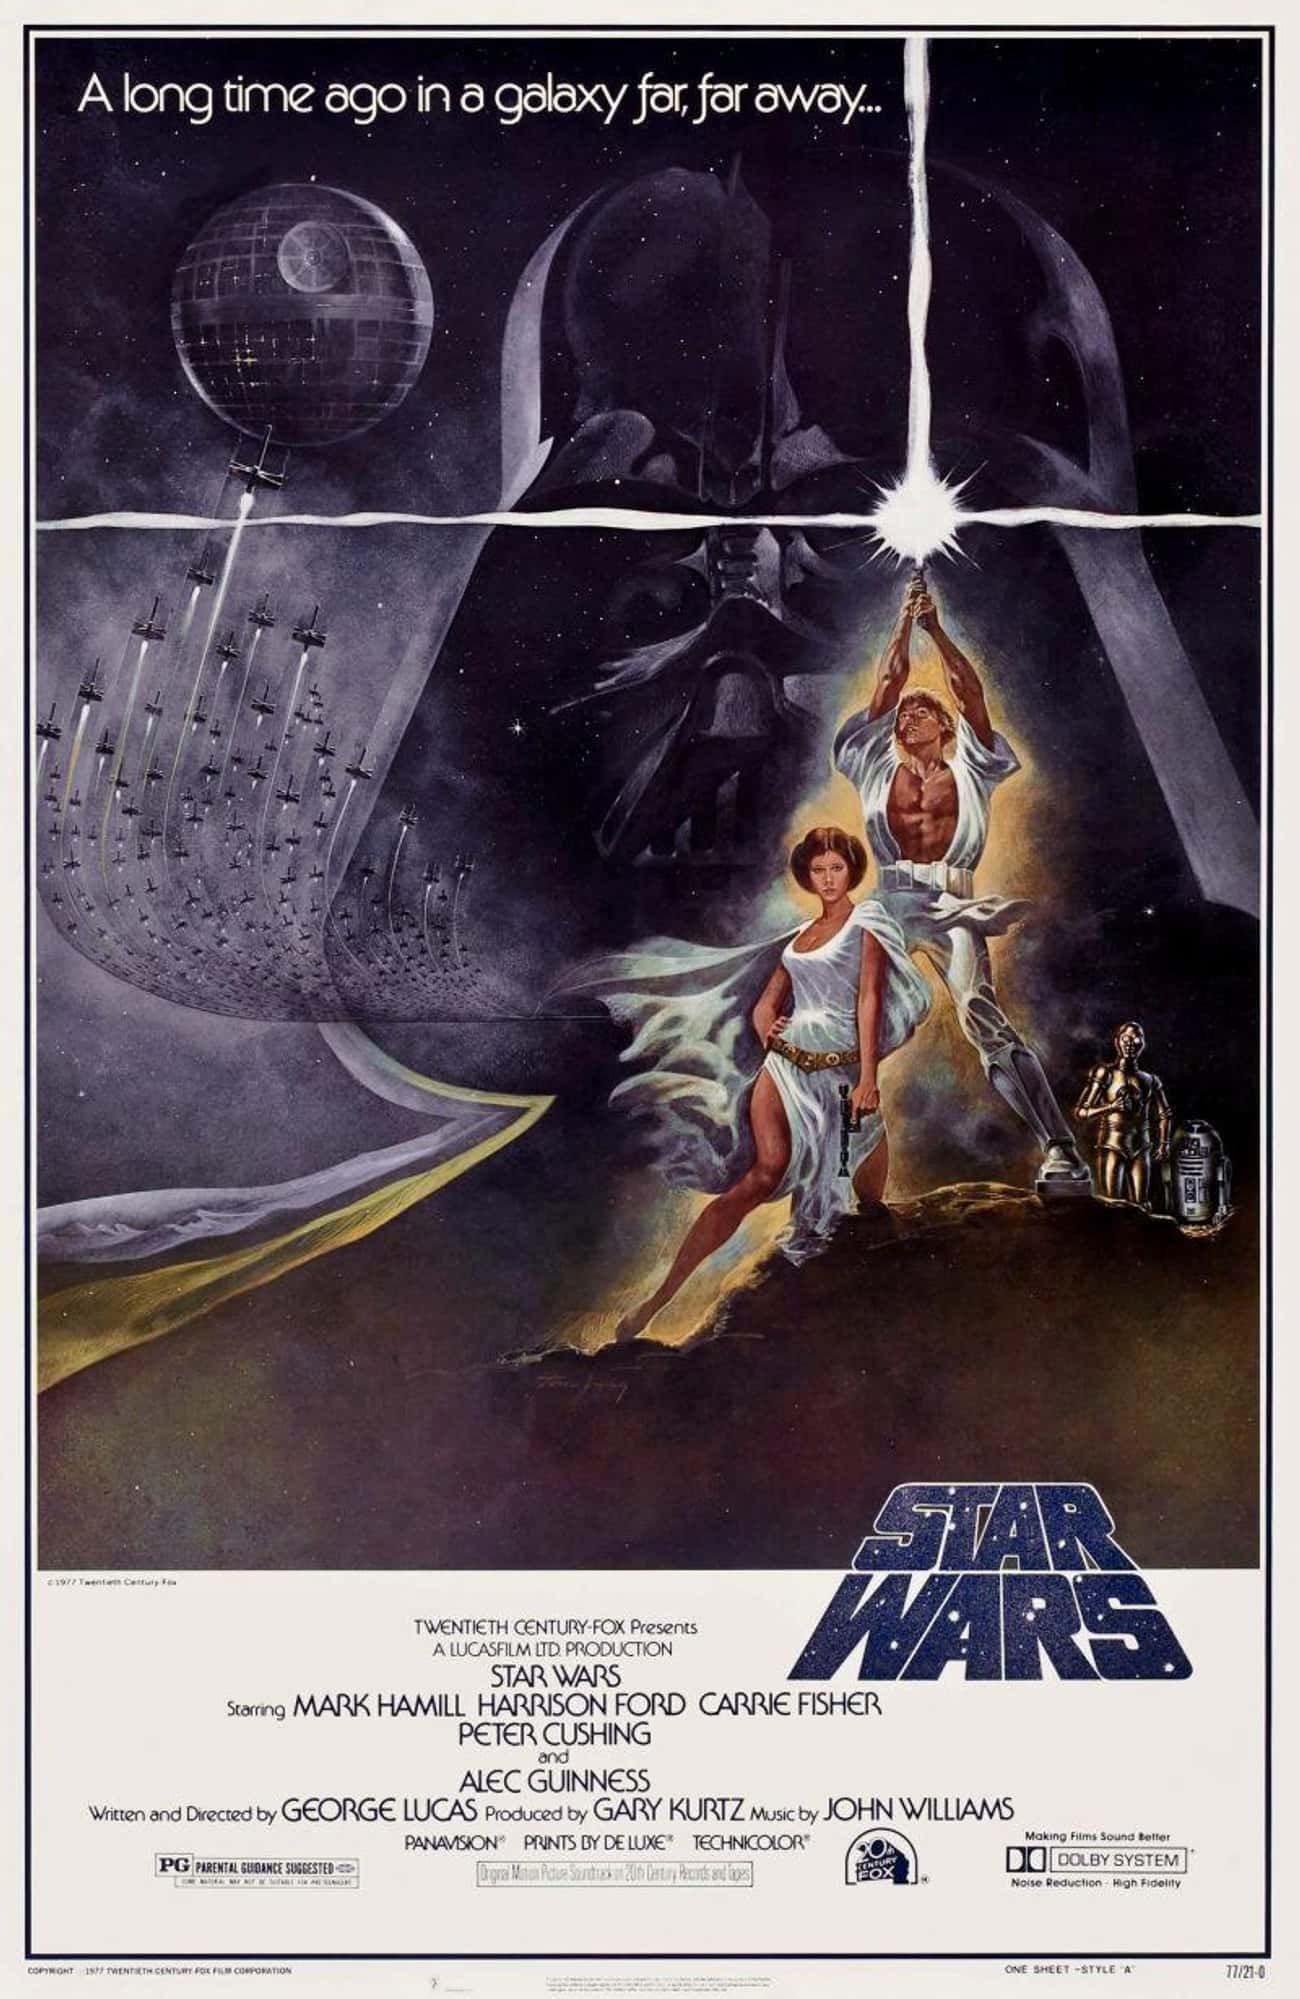 The Empire Strikes Back style a theatrical release poster